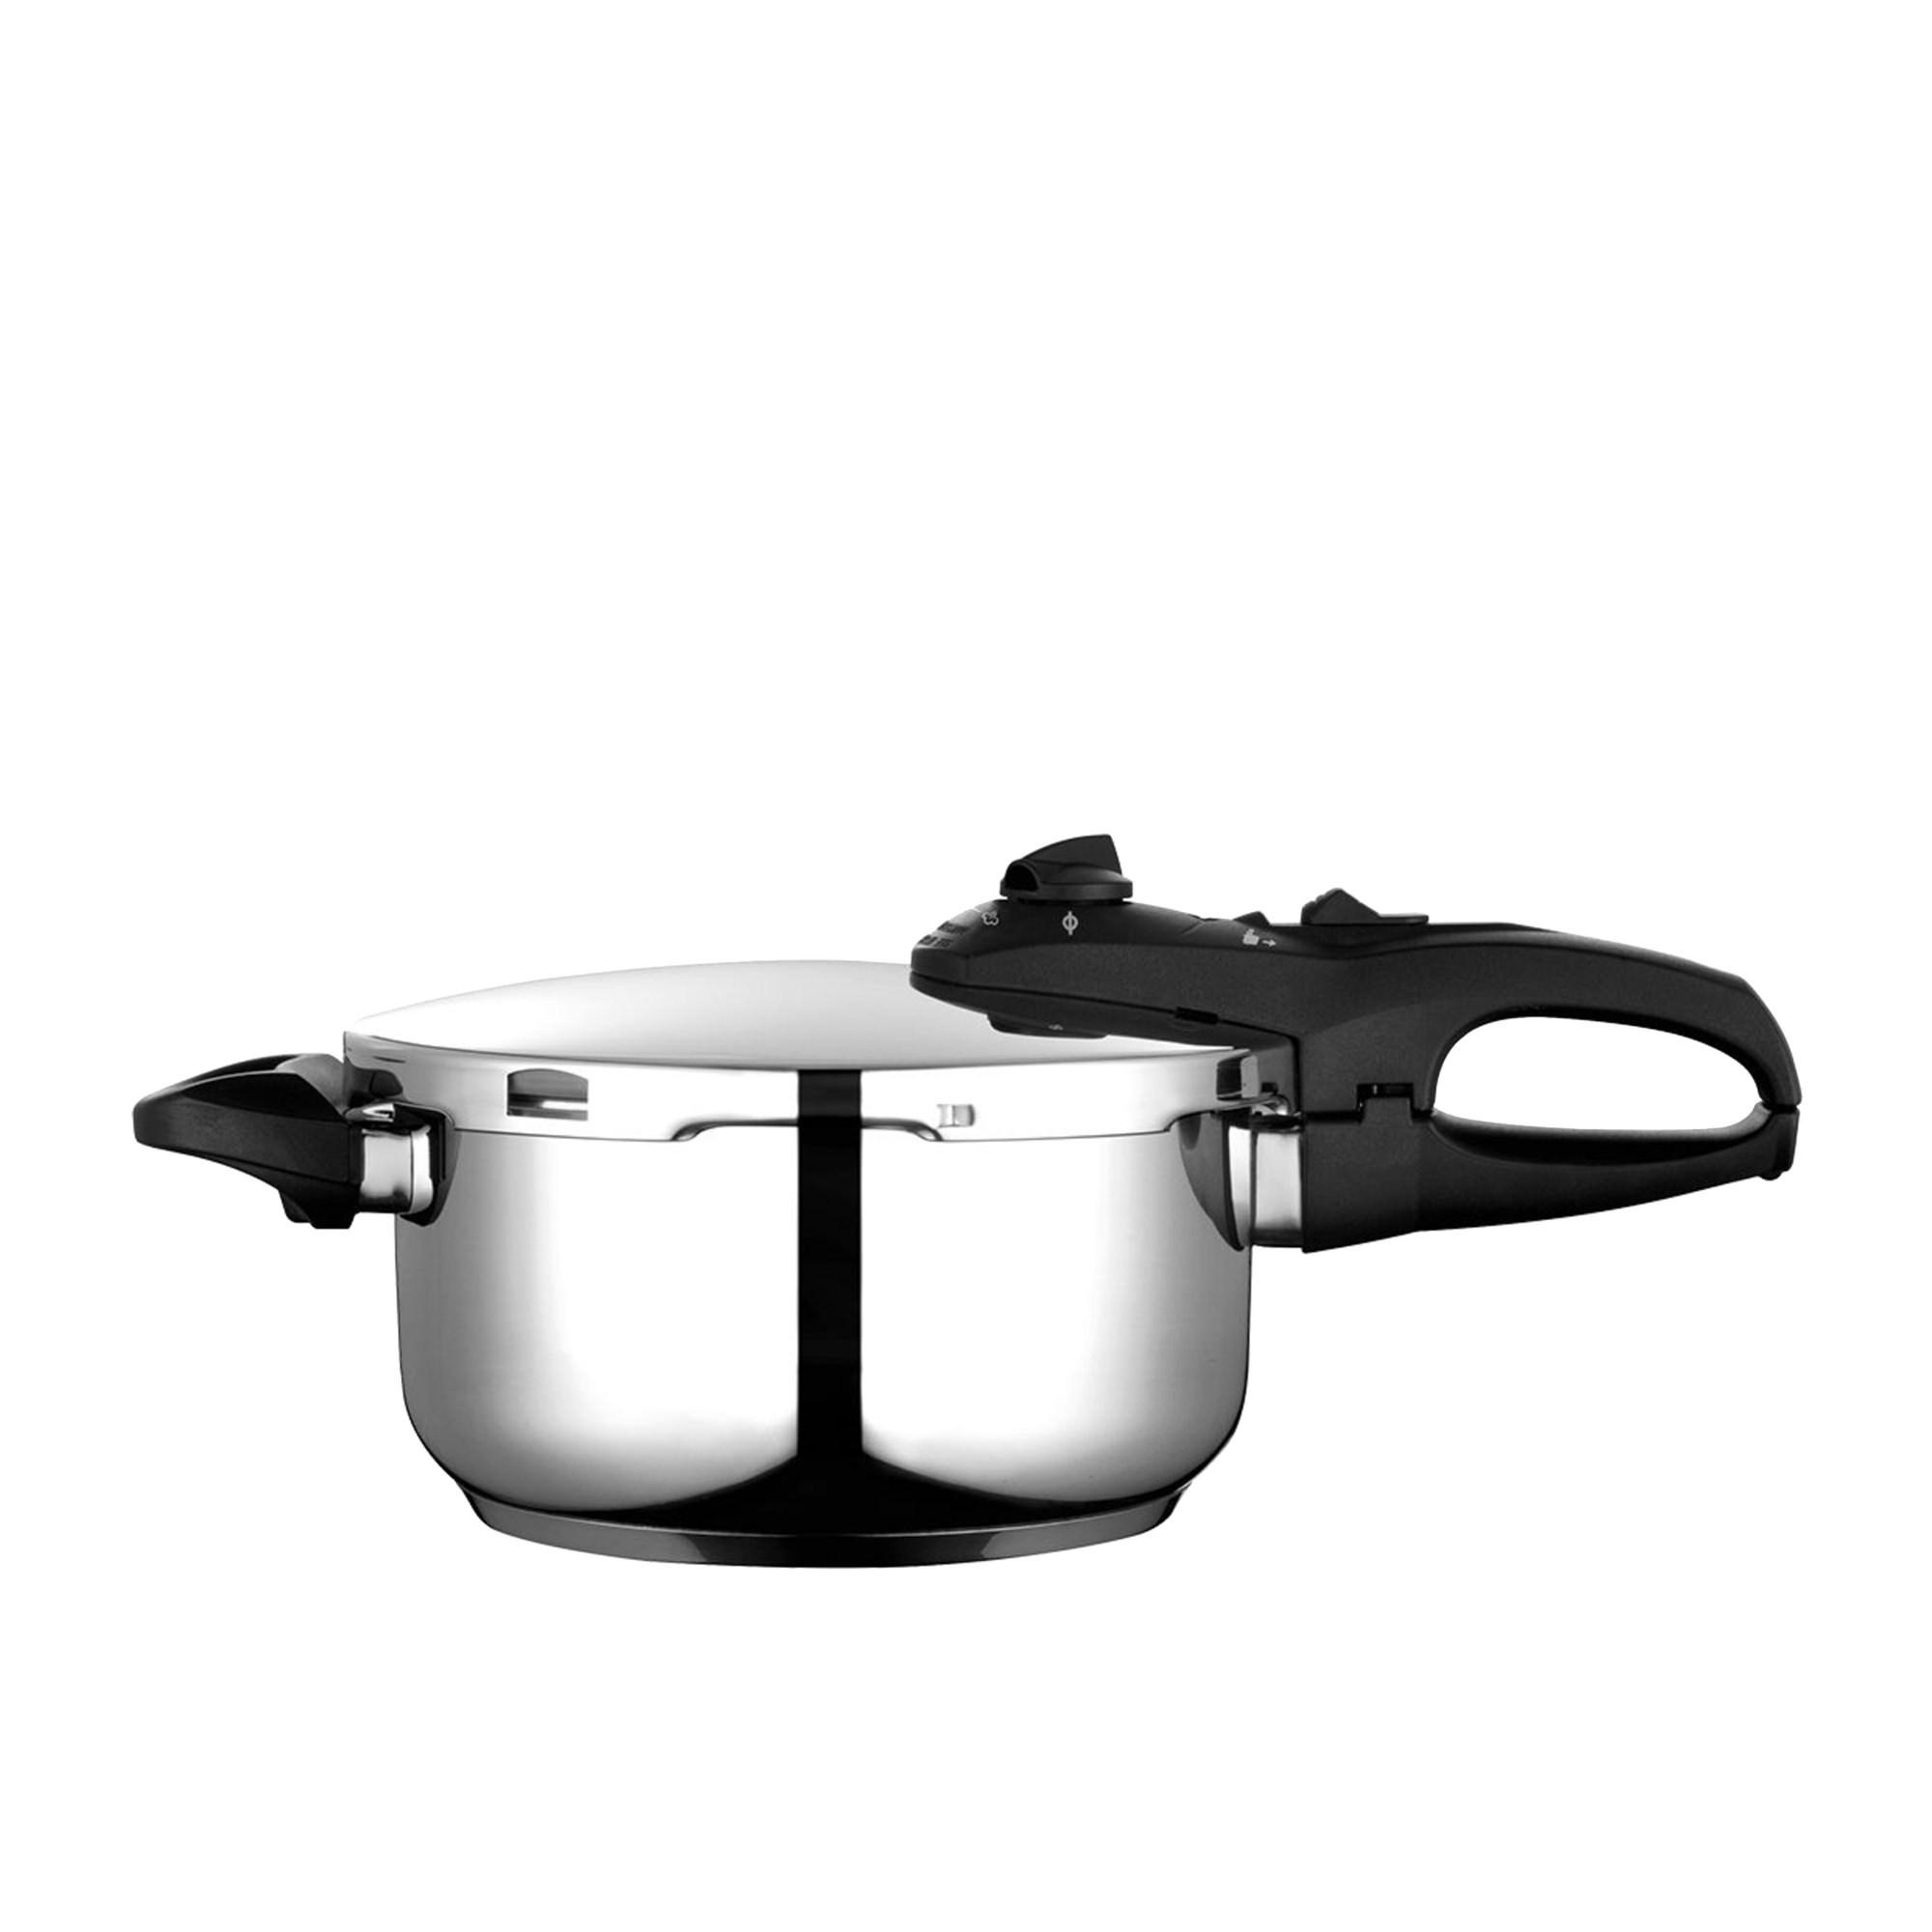 Fagor Duo Stainless Steel Pressure Cooker 4L Image 1